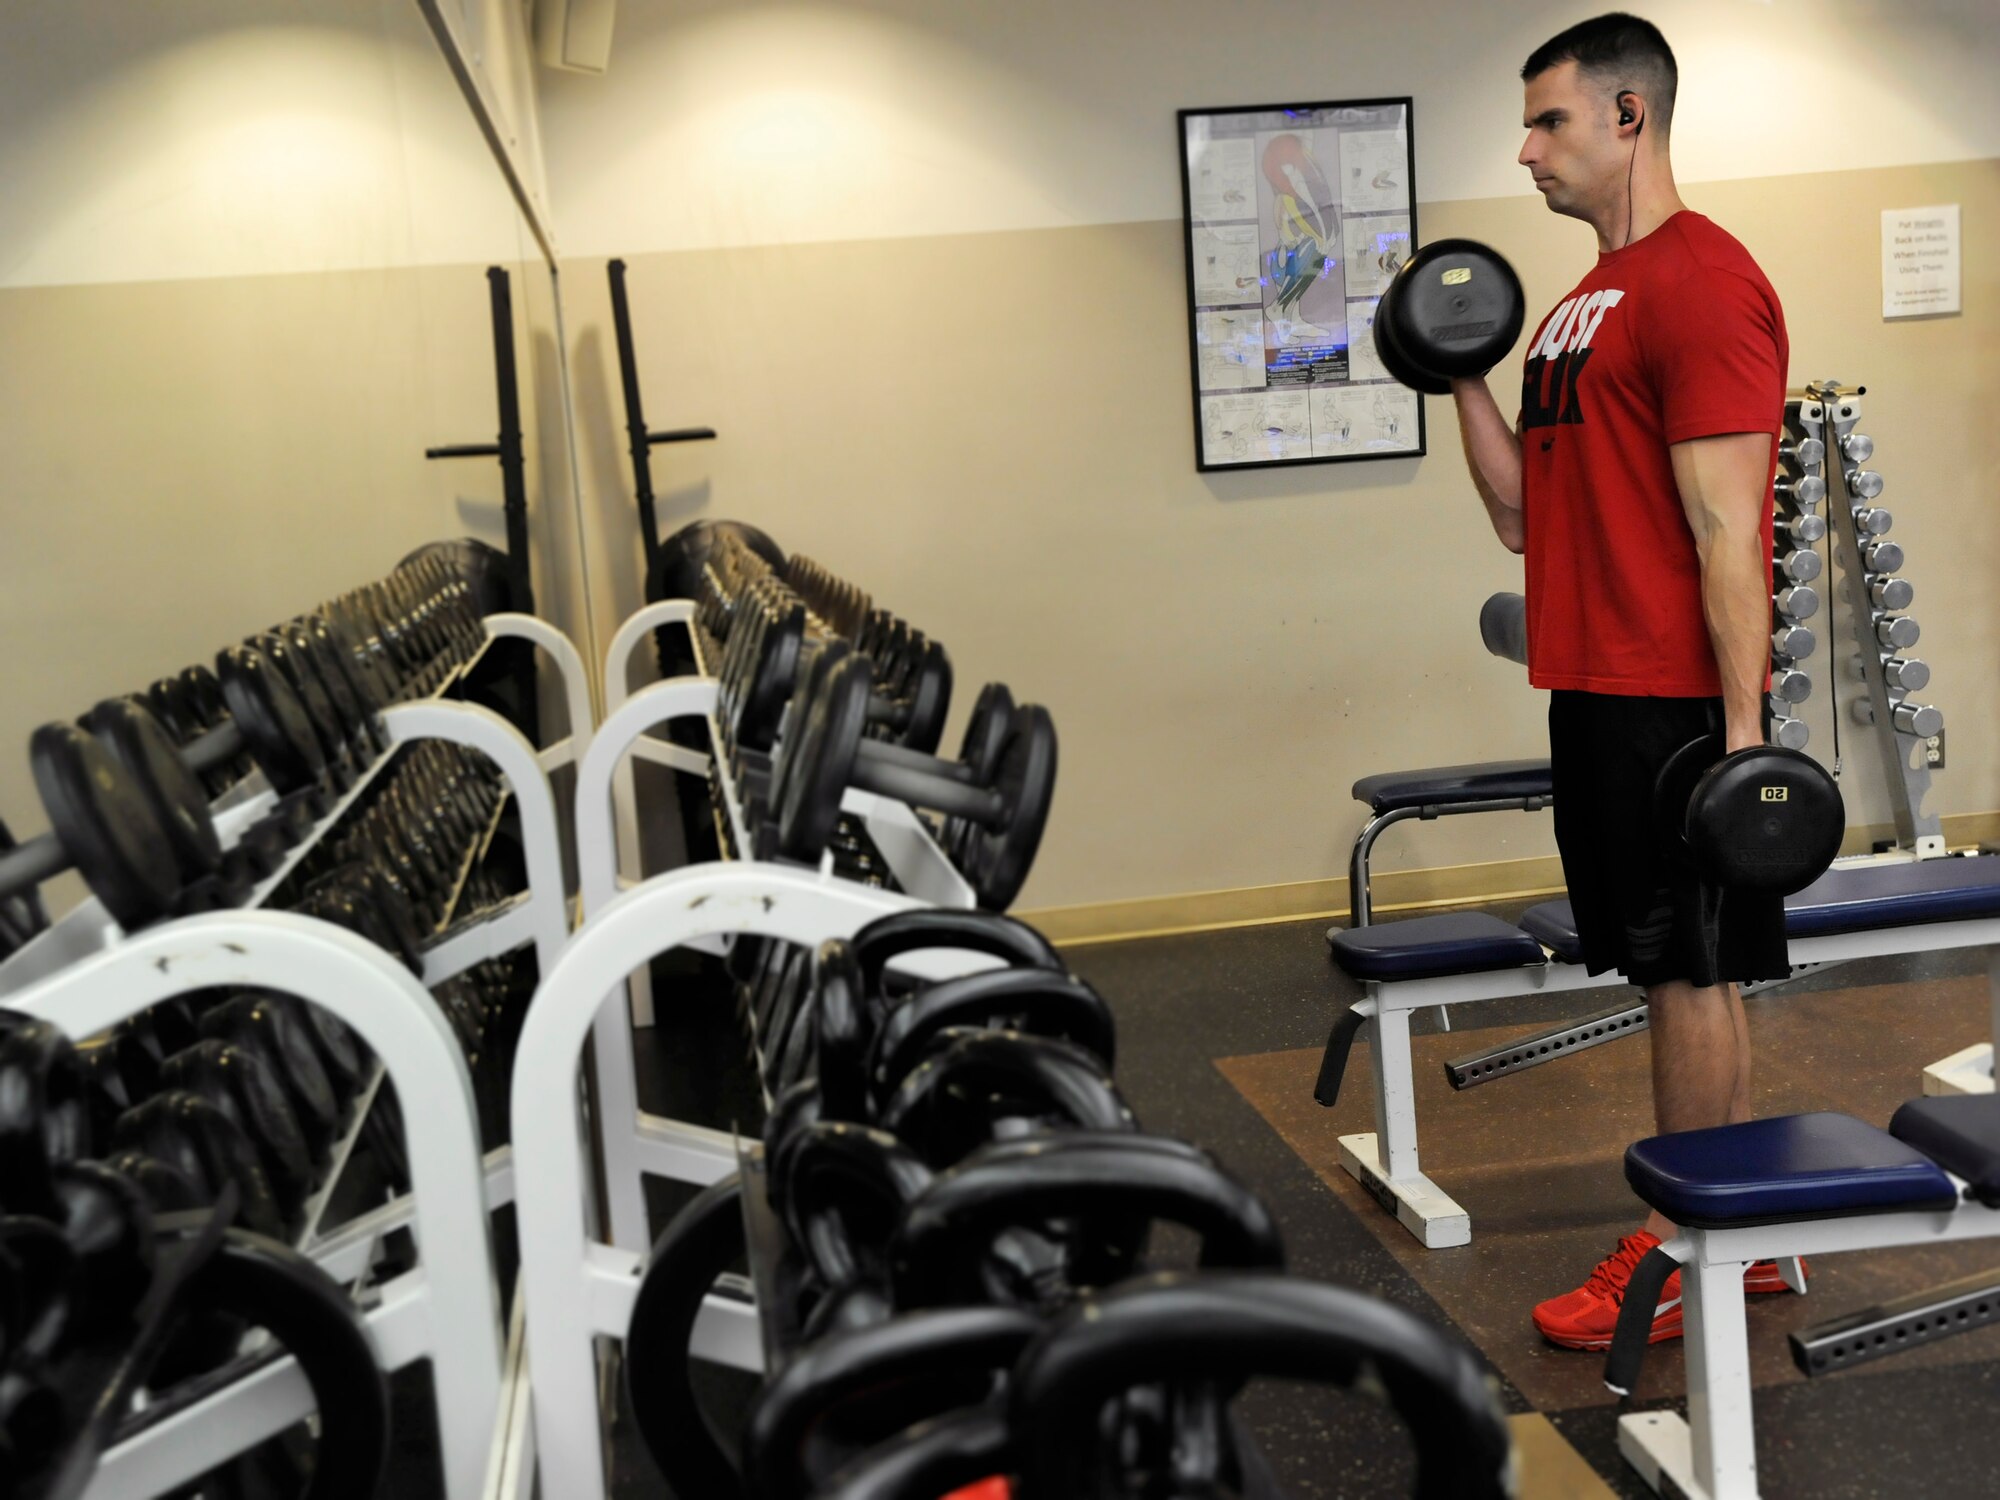 Oregon Air National Guard Tech. Sgt. Thomas Sorensen, an accounting technician assigned to the 142nd Fighter Wing Comptroller Flight, begins his duty day lifting weights at the base gym, Jan. 28, 2016, Portland Air National Guard Base, Ore. The 142nd Fighter Wing began 2016 with a new series of courses and activities under the Comprehensive Airmen Fitness program, designed to focus on Airmen and their families' physical, social, mental and spiritual wellness. (U.S. Air National Guard photo by Tech. Sgt. John Hughel, 142nd Fighter Wing Public Affairs/released)